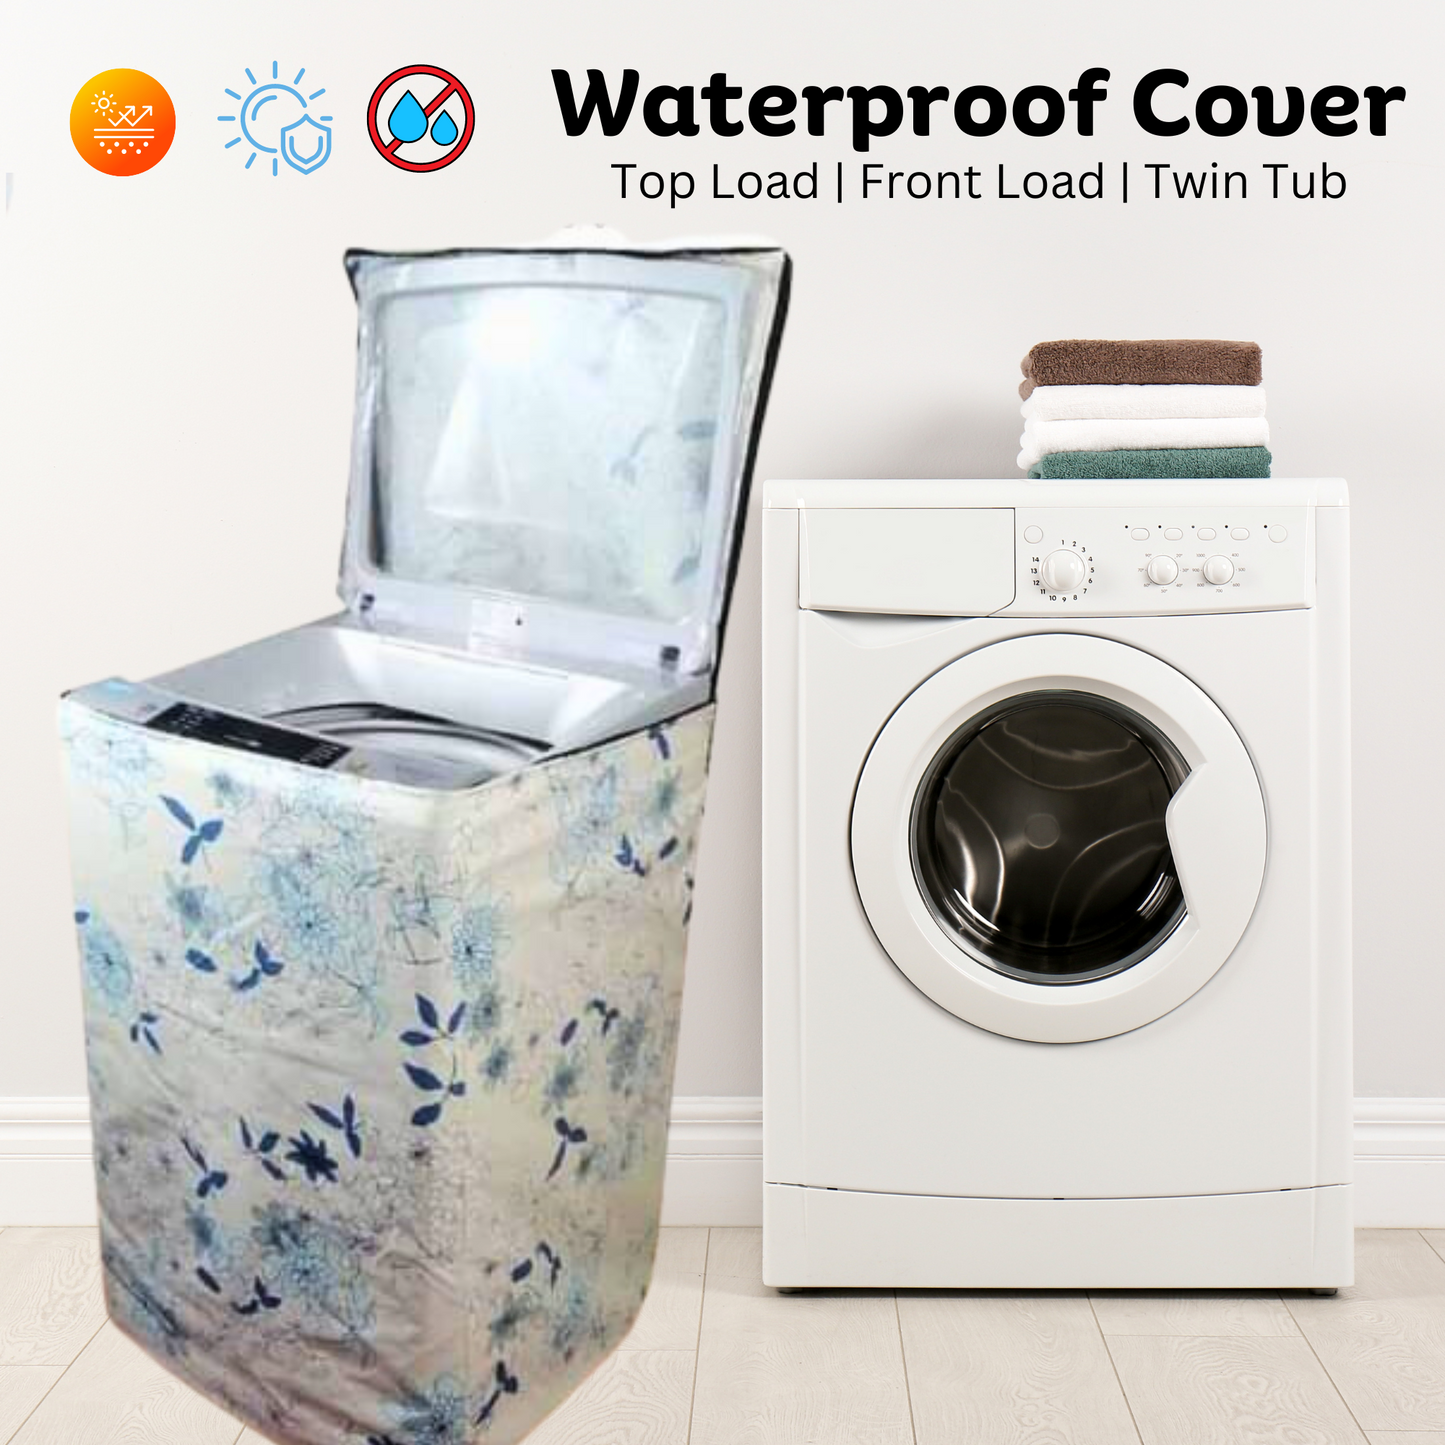 Best Waterproof Washing Machine Cover for Top Load & Front Load in Pakistan